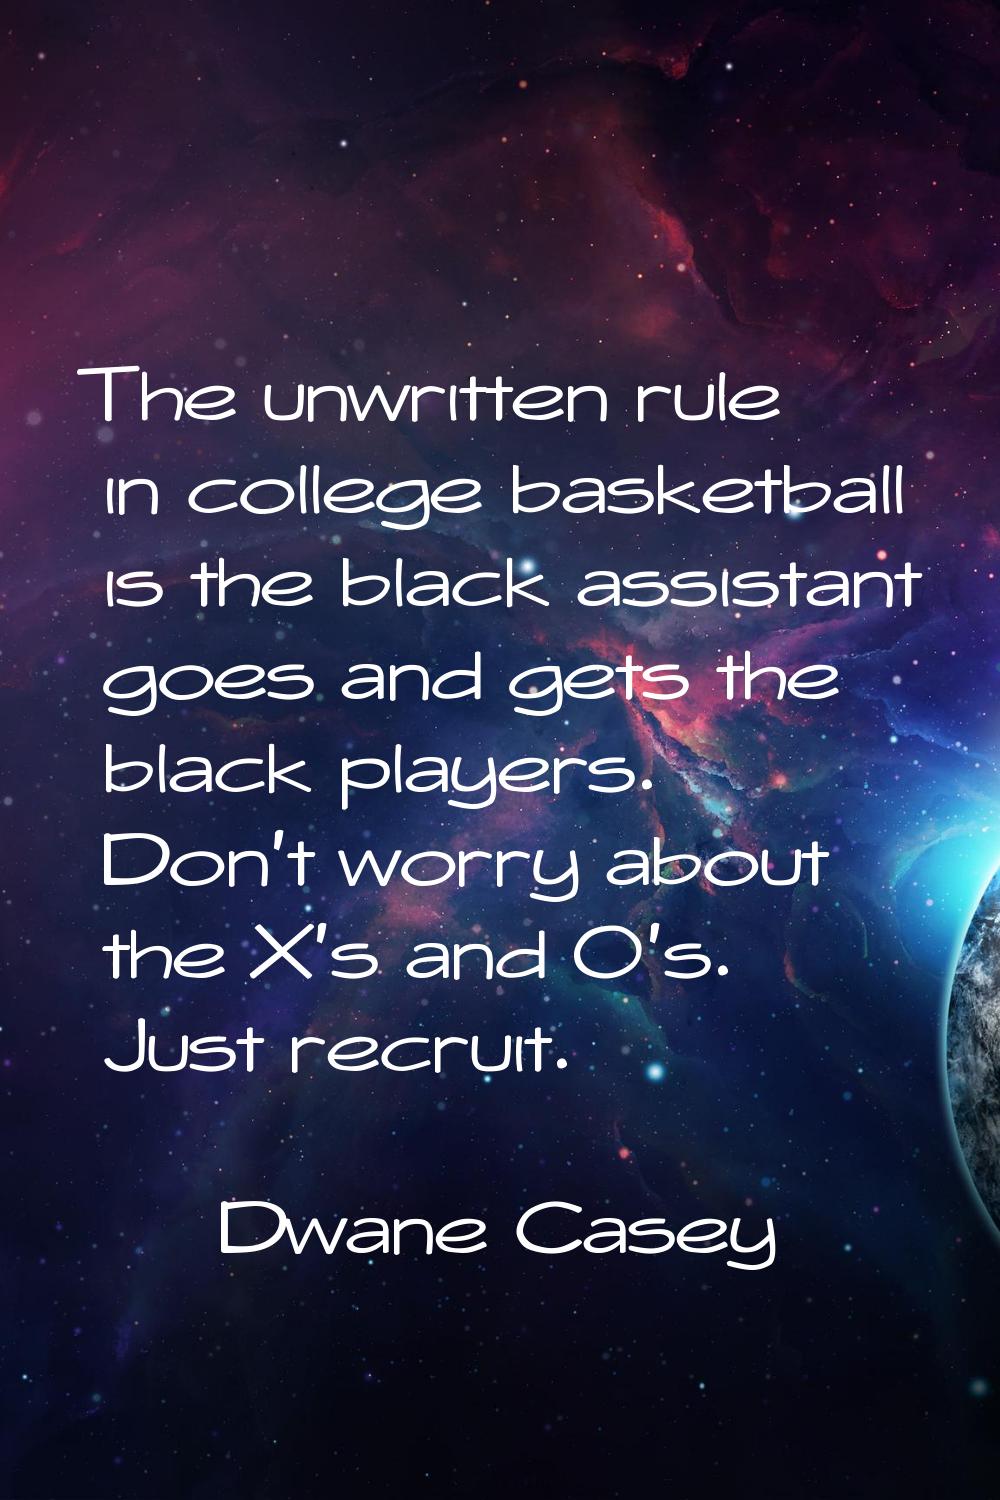 The unwritten rule in college basketball is the black assistant goes and gets the black players. Do